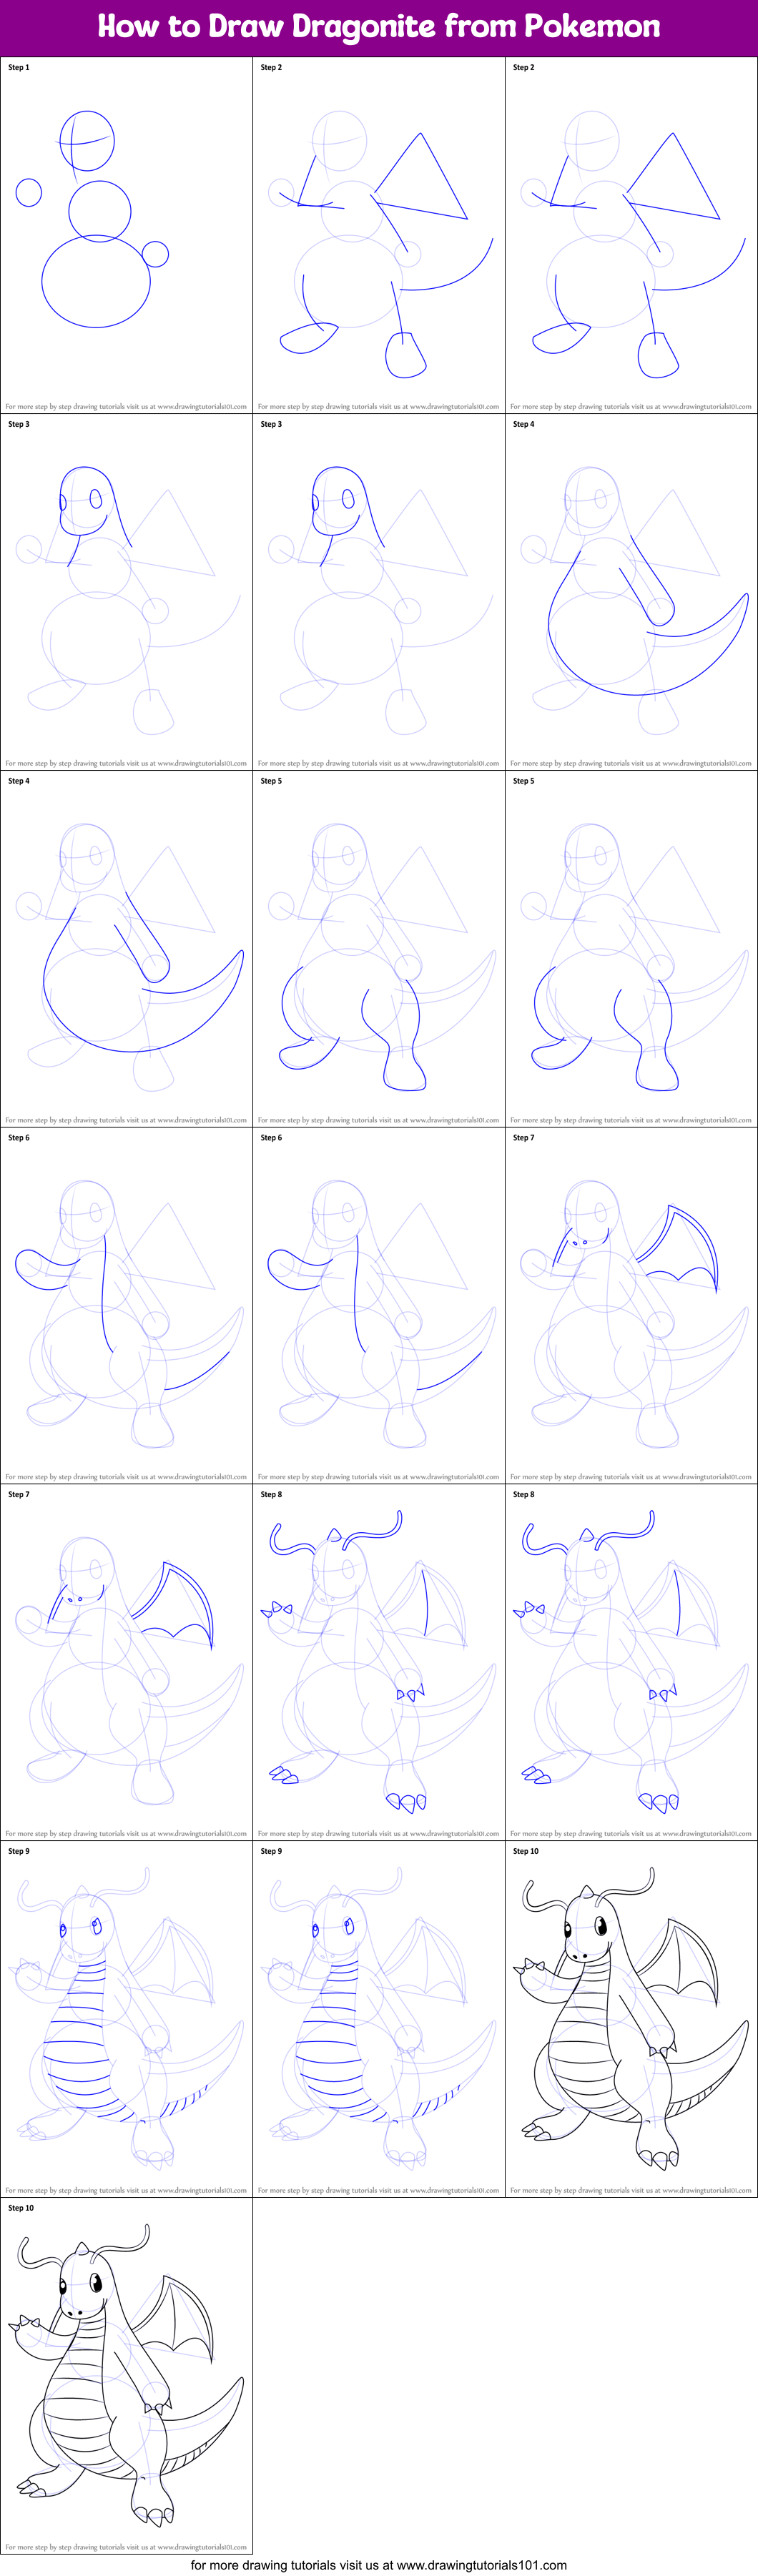 How to Draw Dragonite from Pokemon printable step by step drawing sheet